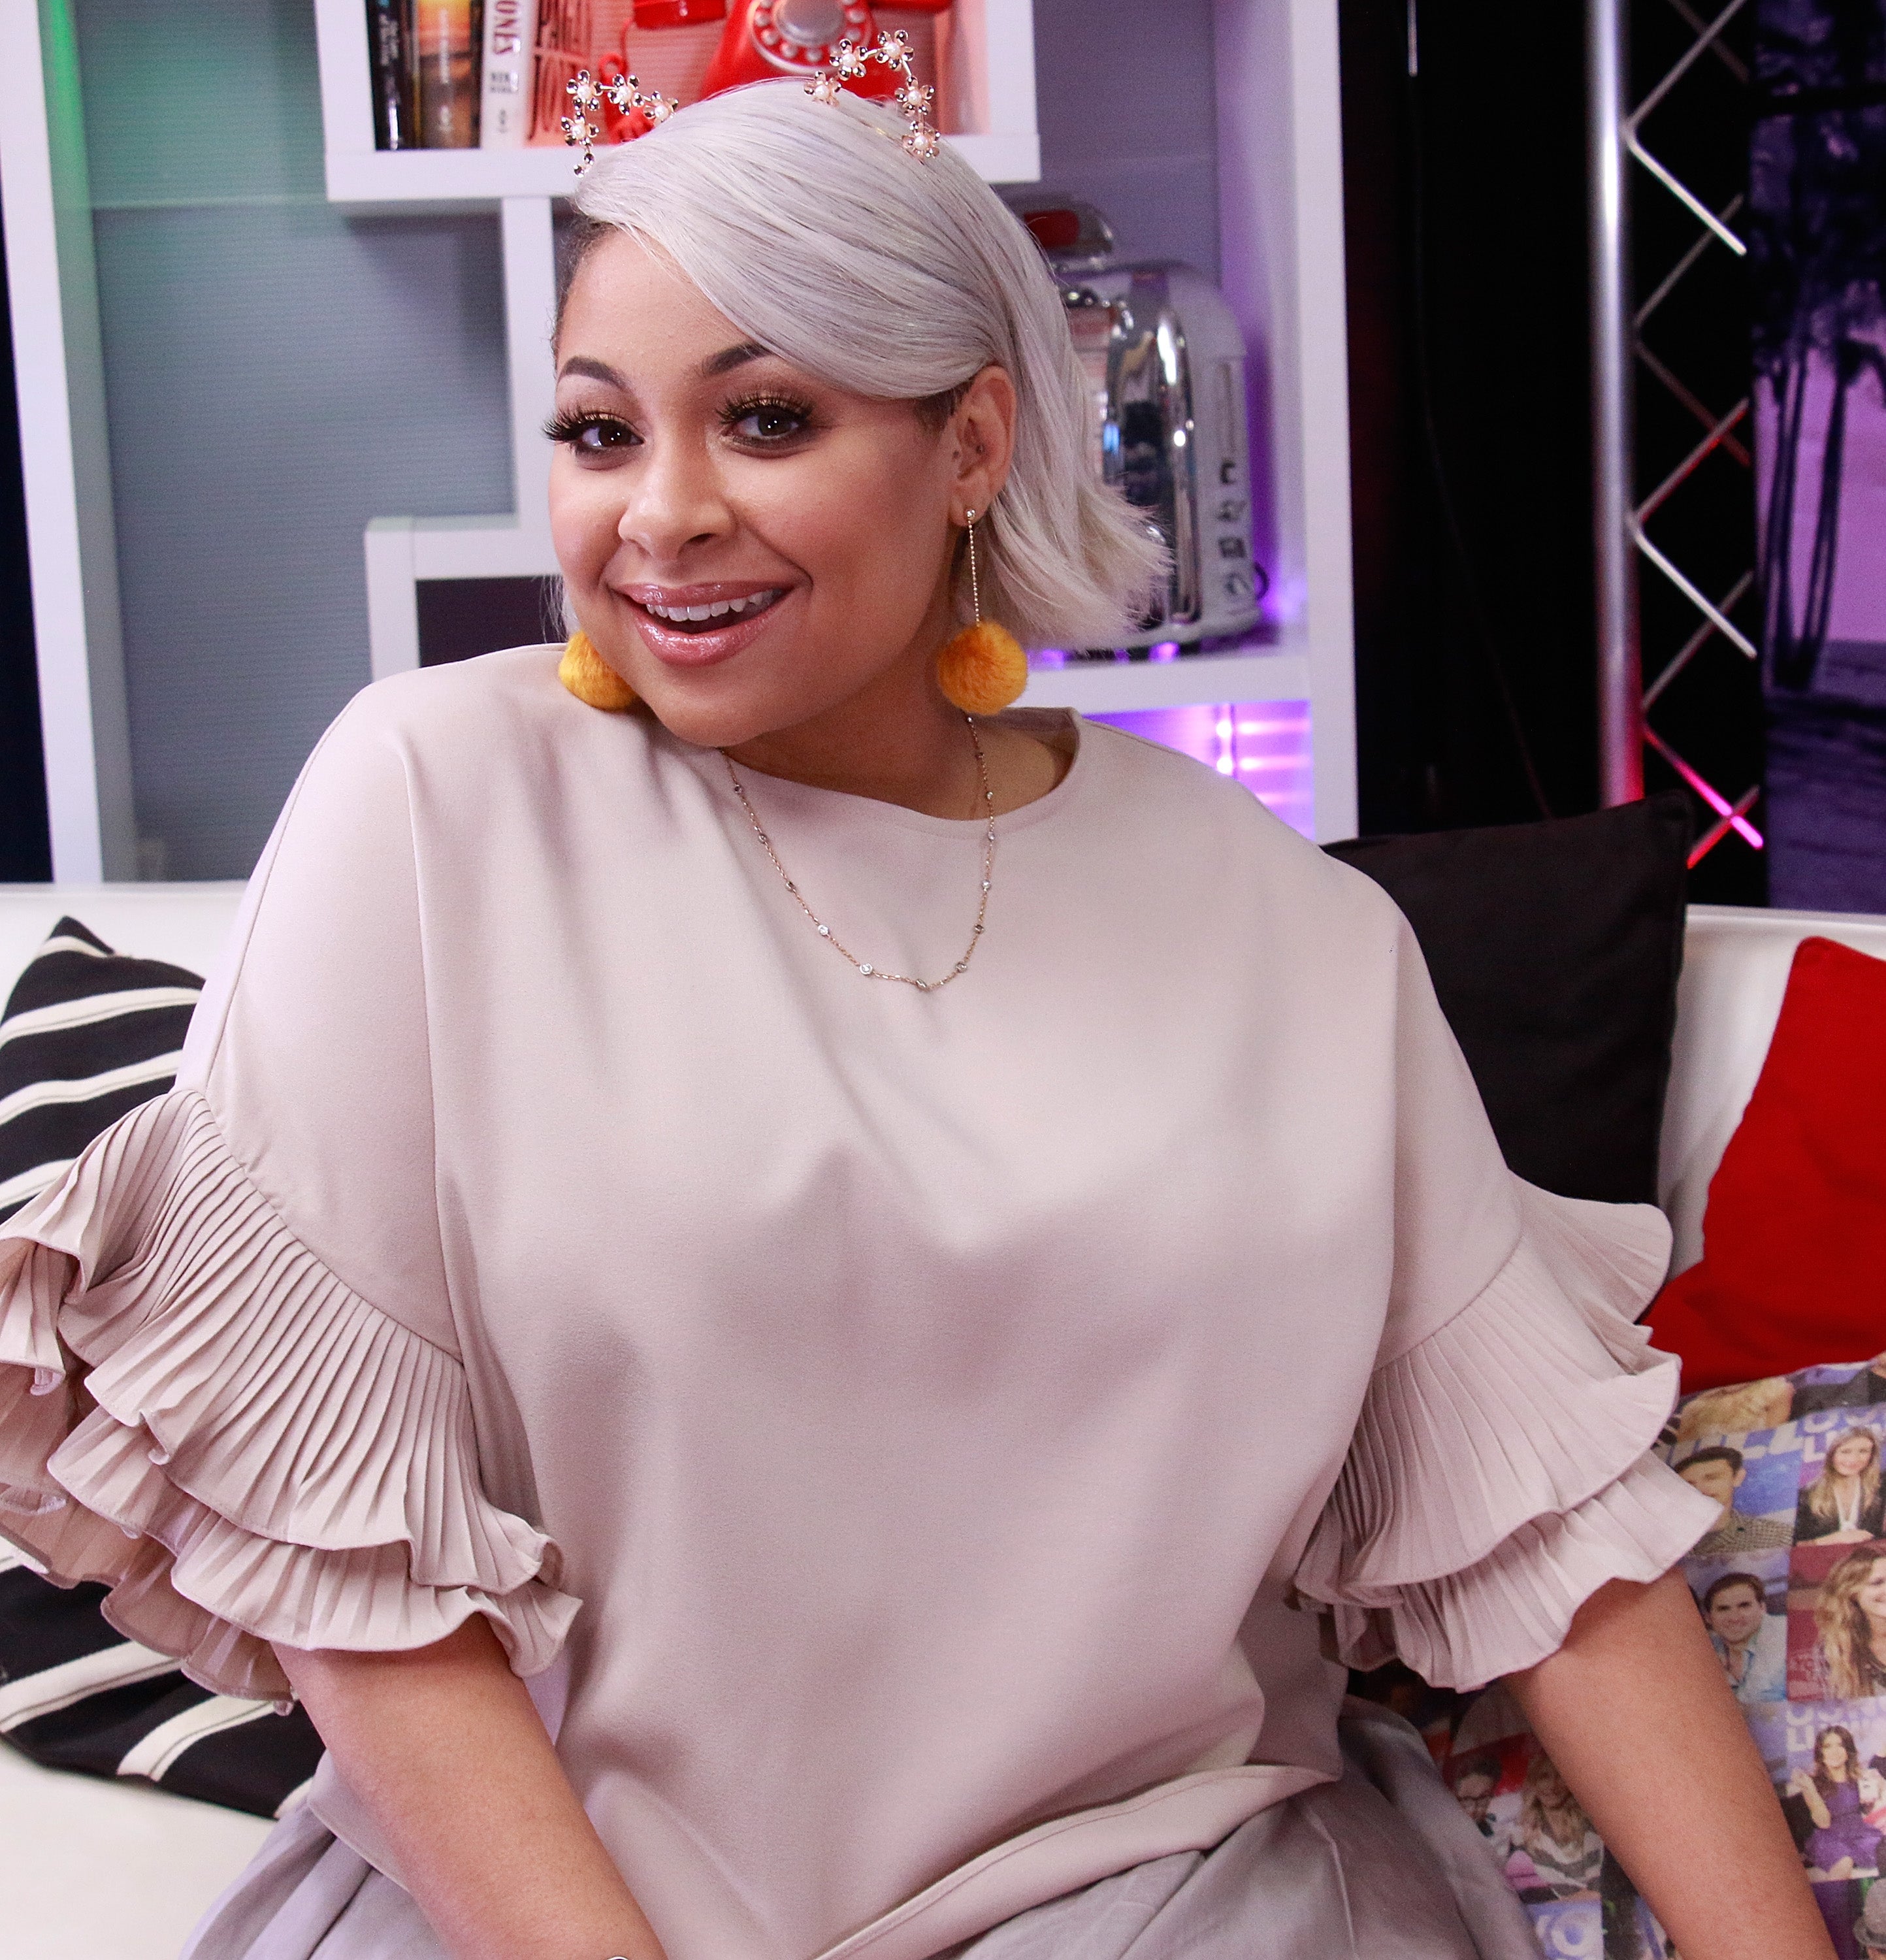 The Quick Read: Rappers Are Not Happy With Raven-Symone After She Calls Men Of Hip-Hop 'So-Called Successful'
